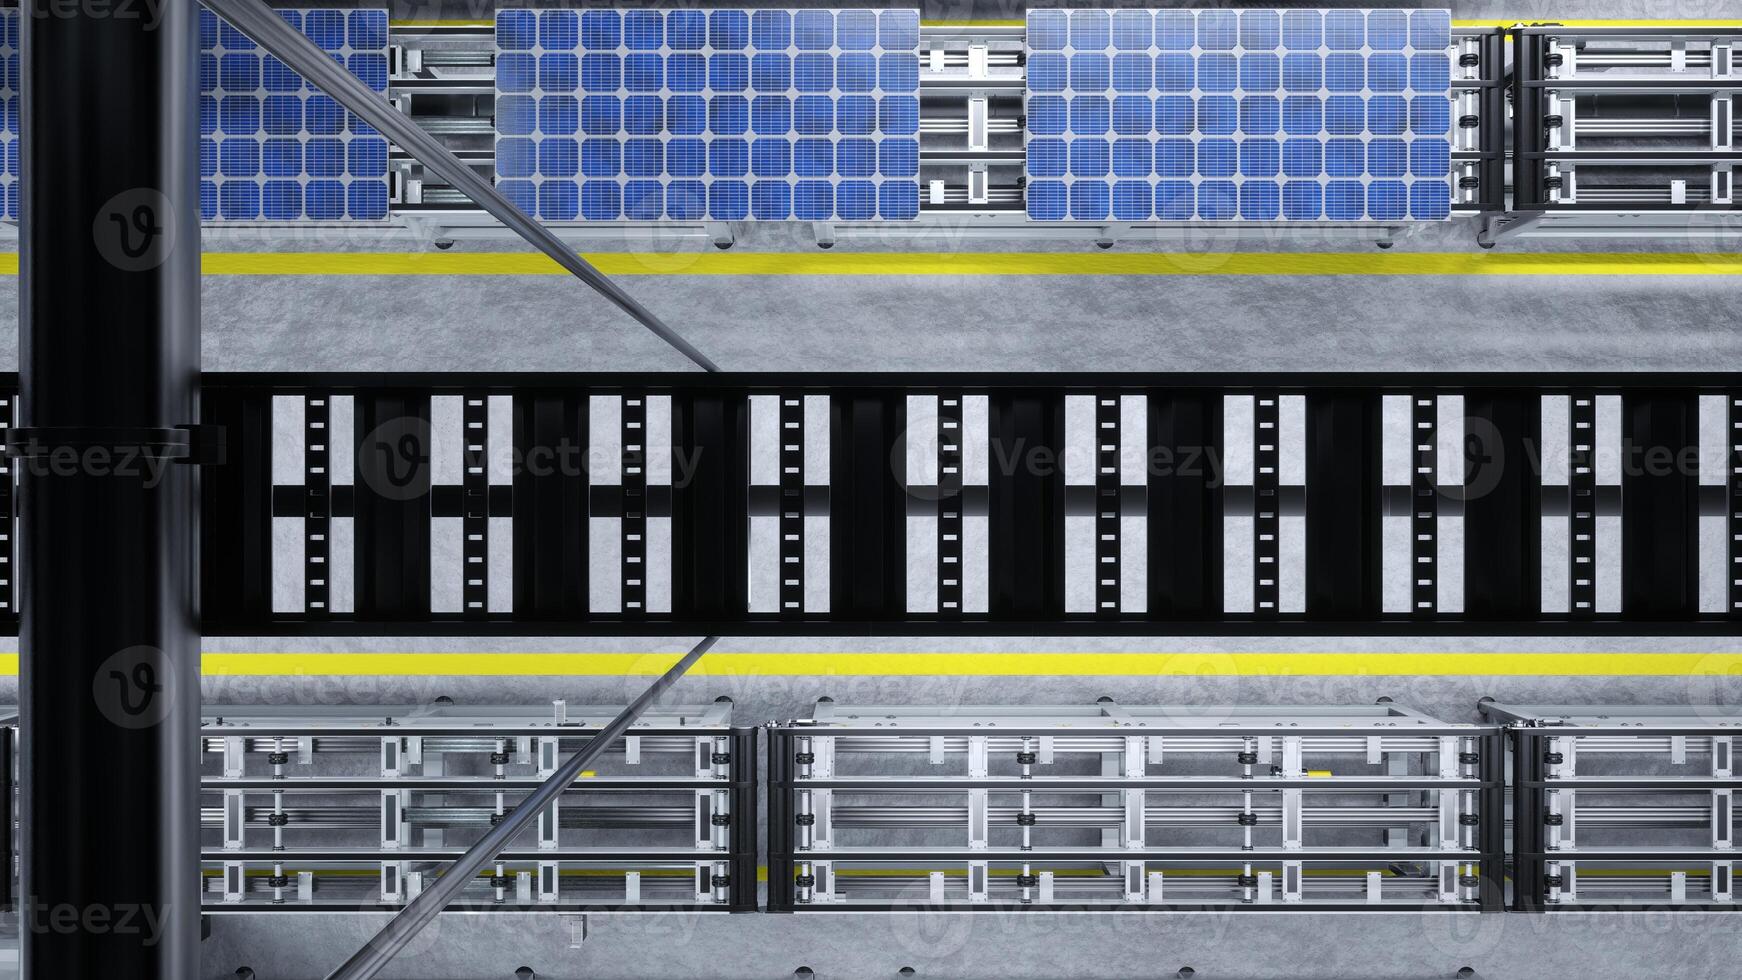 Top down view of solar panels on assembly line operated by high tech robot arms in modern sustainable factory, 3D illustration. Aerial shot of PV cells in modern automated facility photo